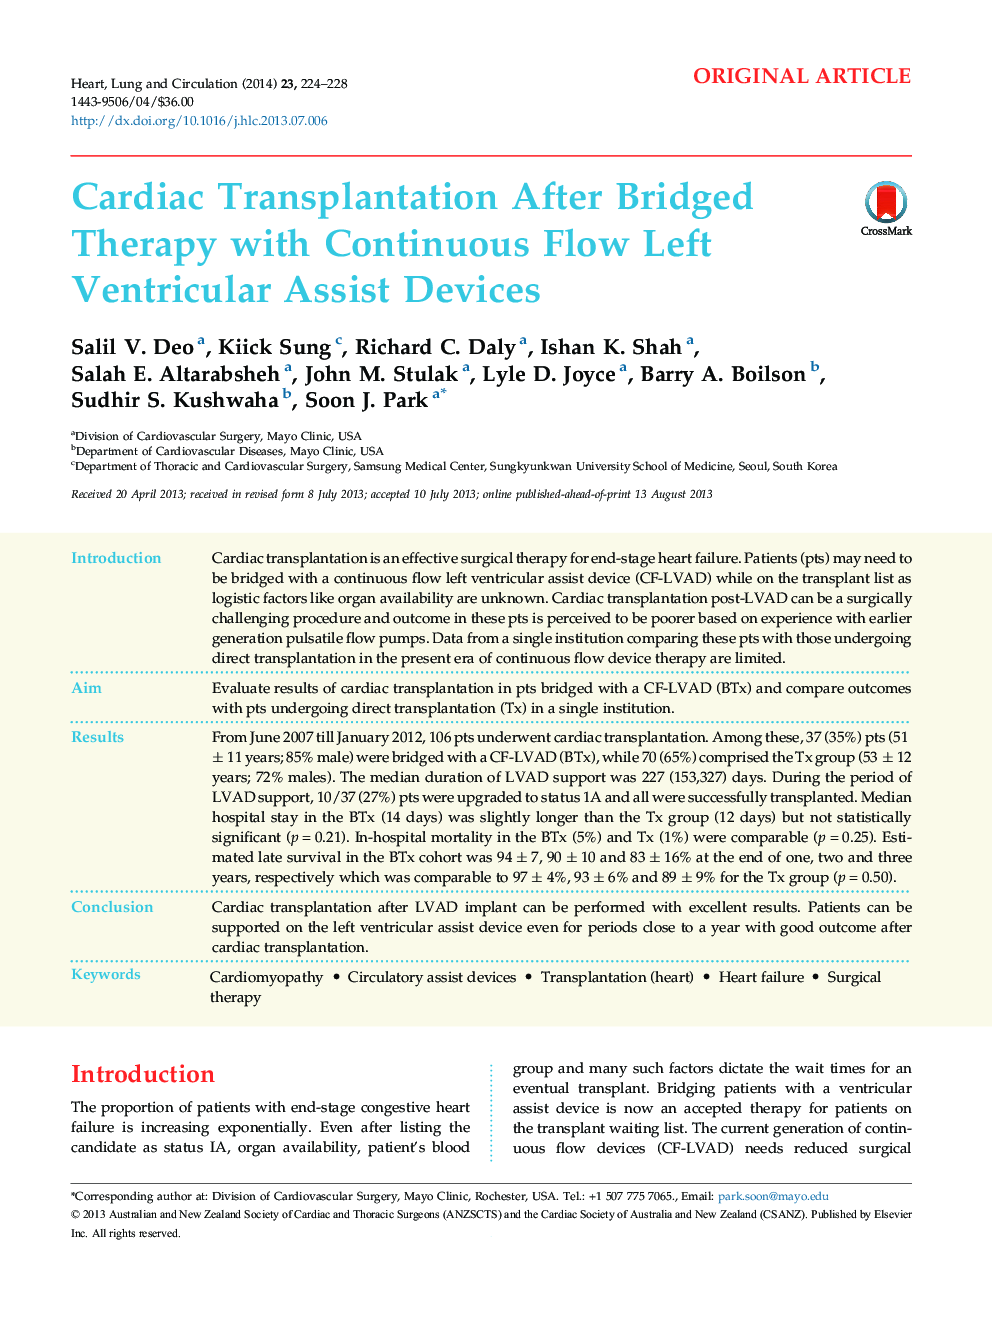 Cardiac Transplantation After Bridged Therapy with Continuous Flow Left Ventricular Assist Devices